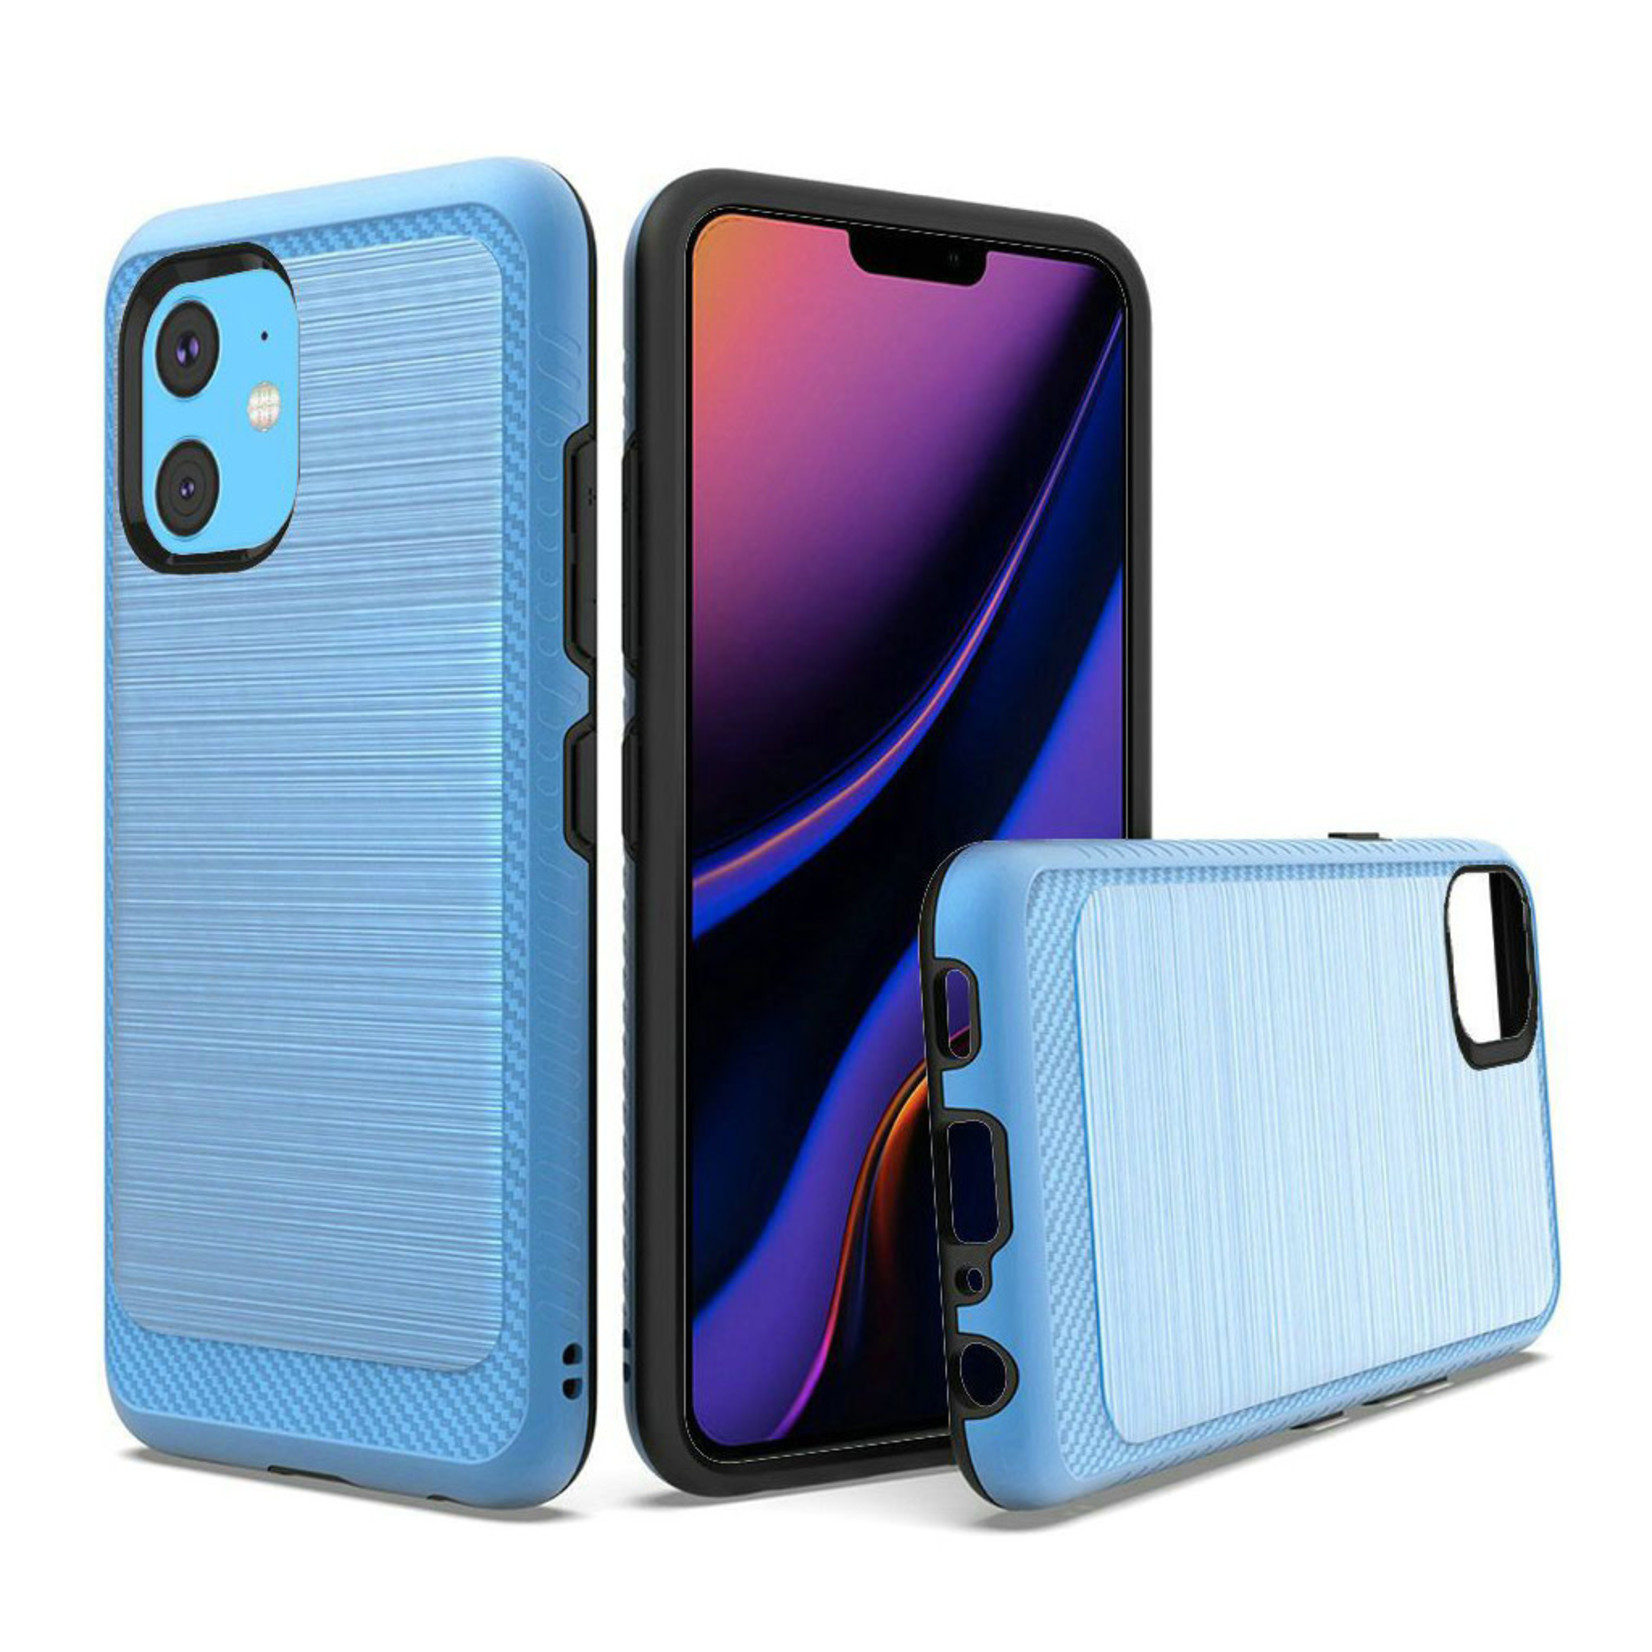 Metallic PC TPU Brushed Case with Carbon Fiber Edge for iPhone 11